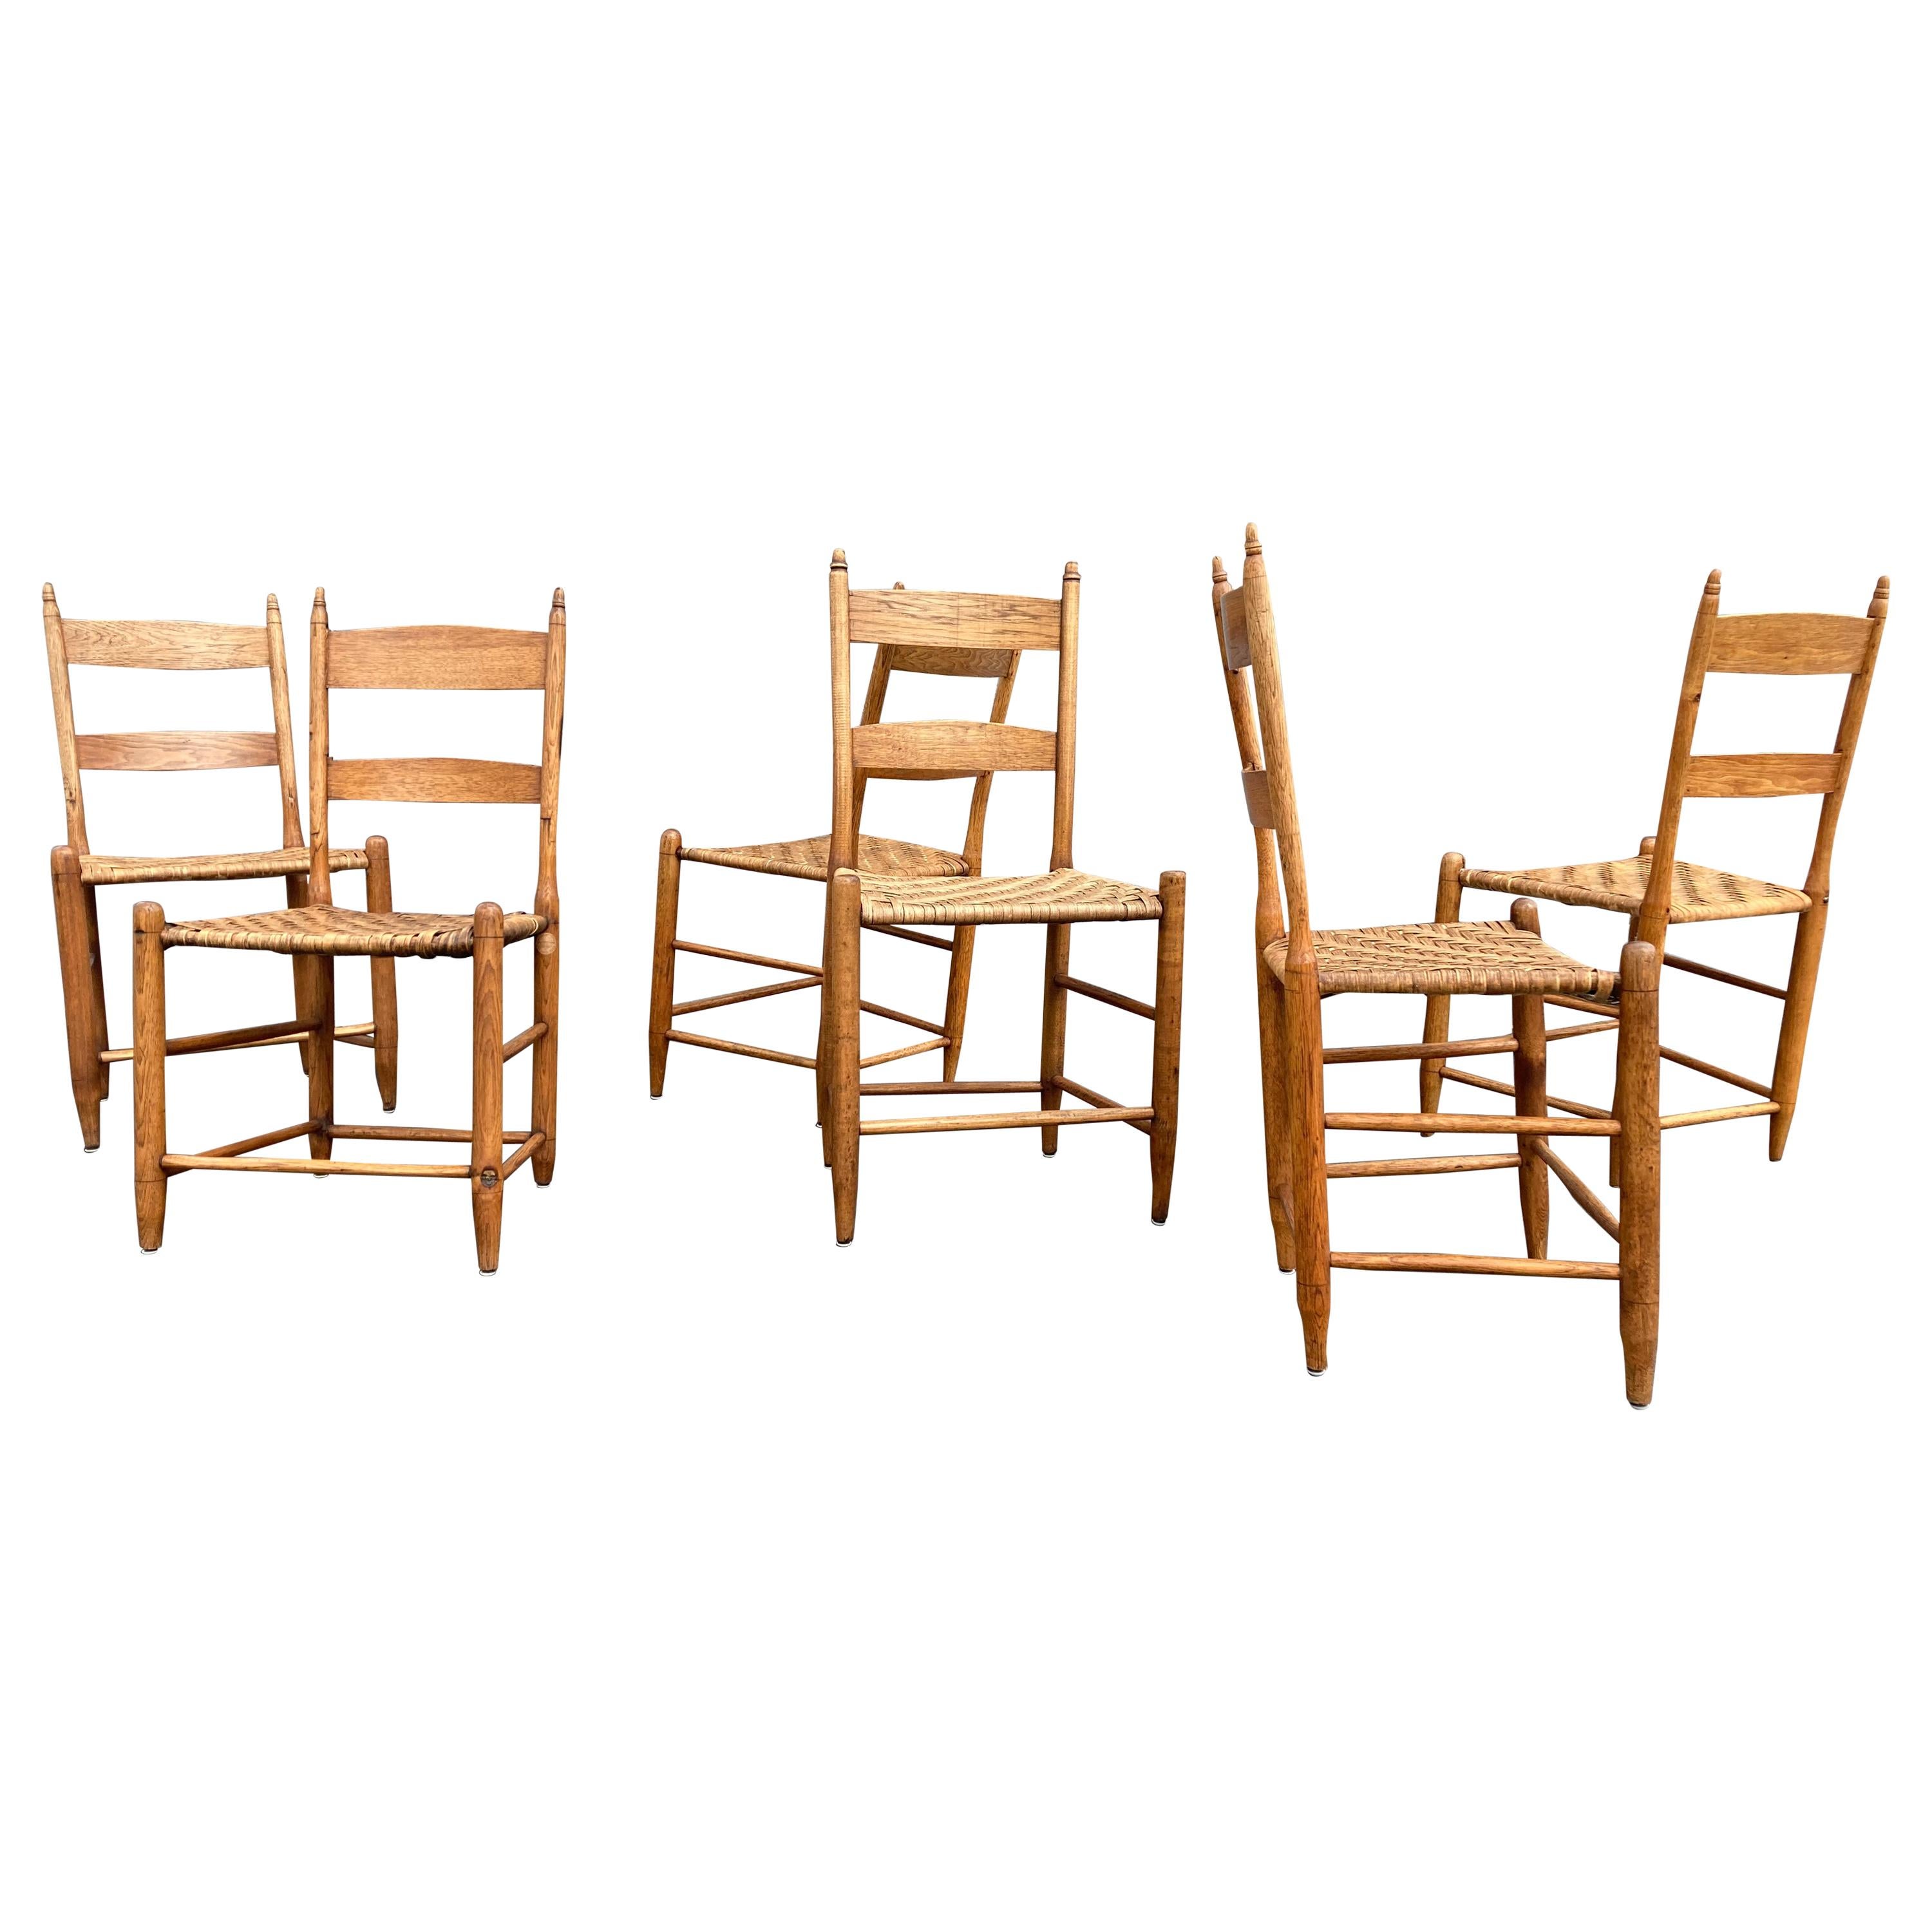 Set of Six Beautiful Antique Dining Chairs, Hickory, Virginia, 1880s